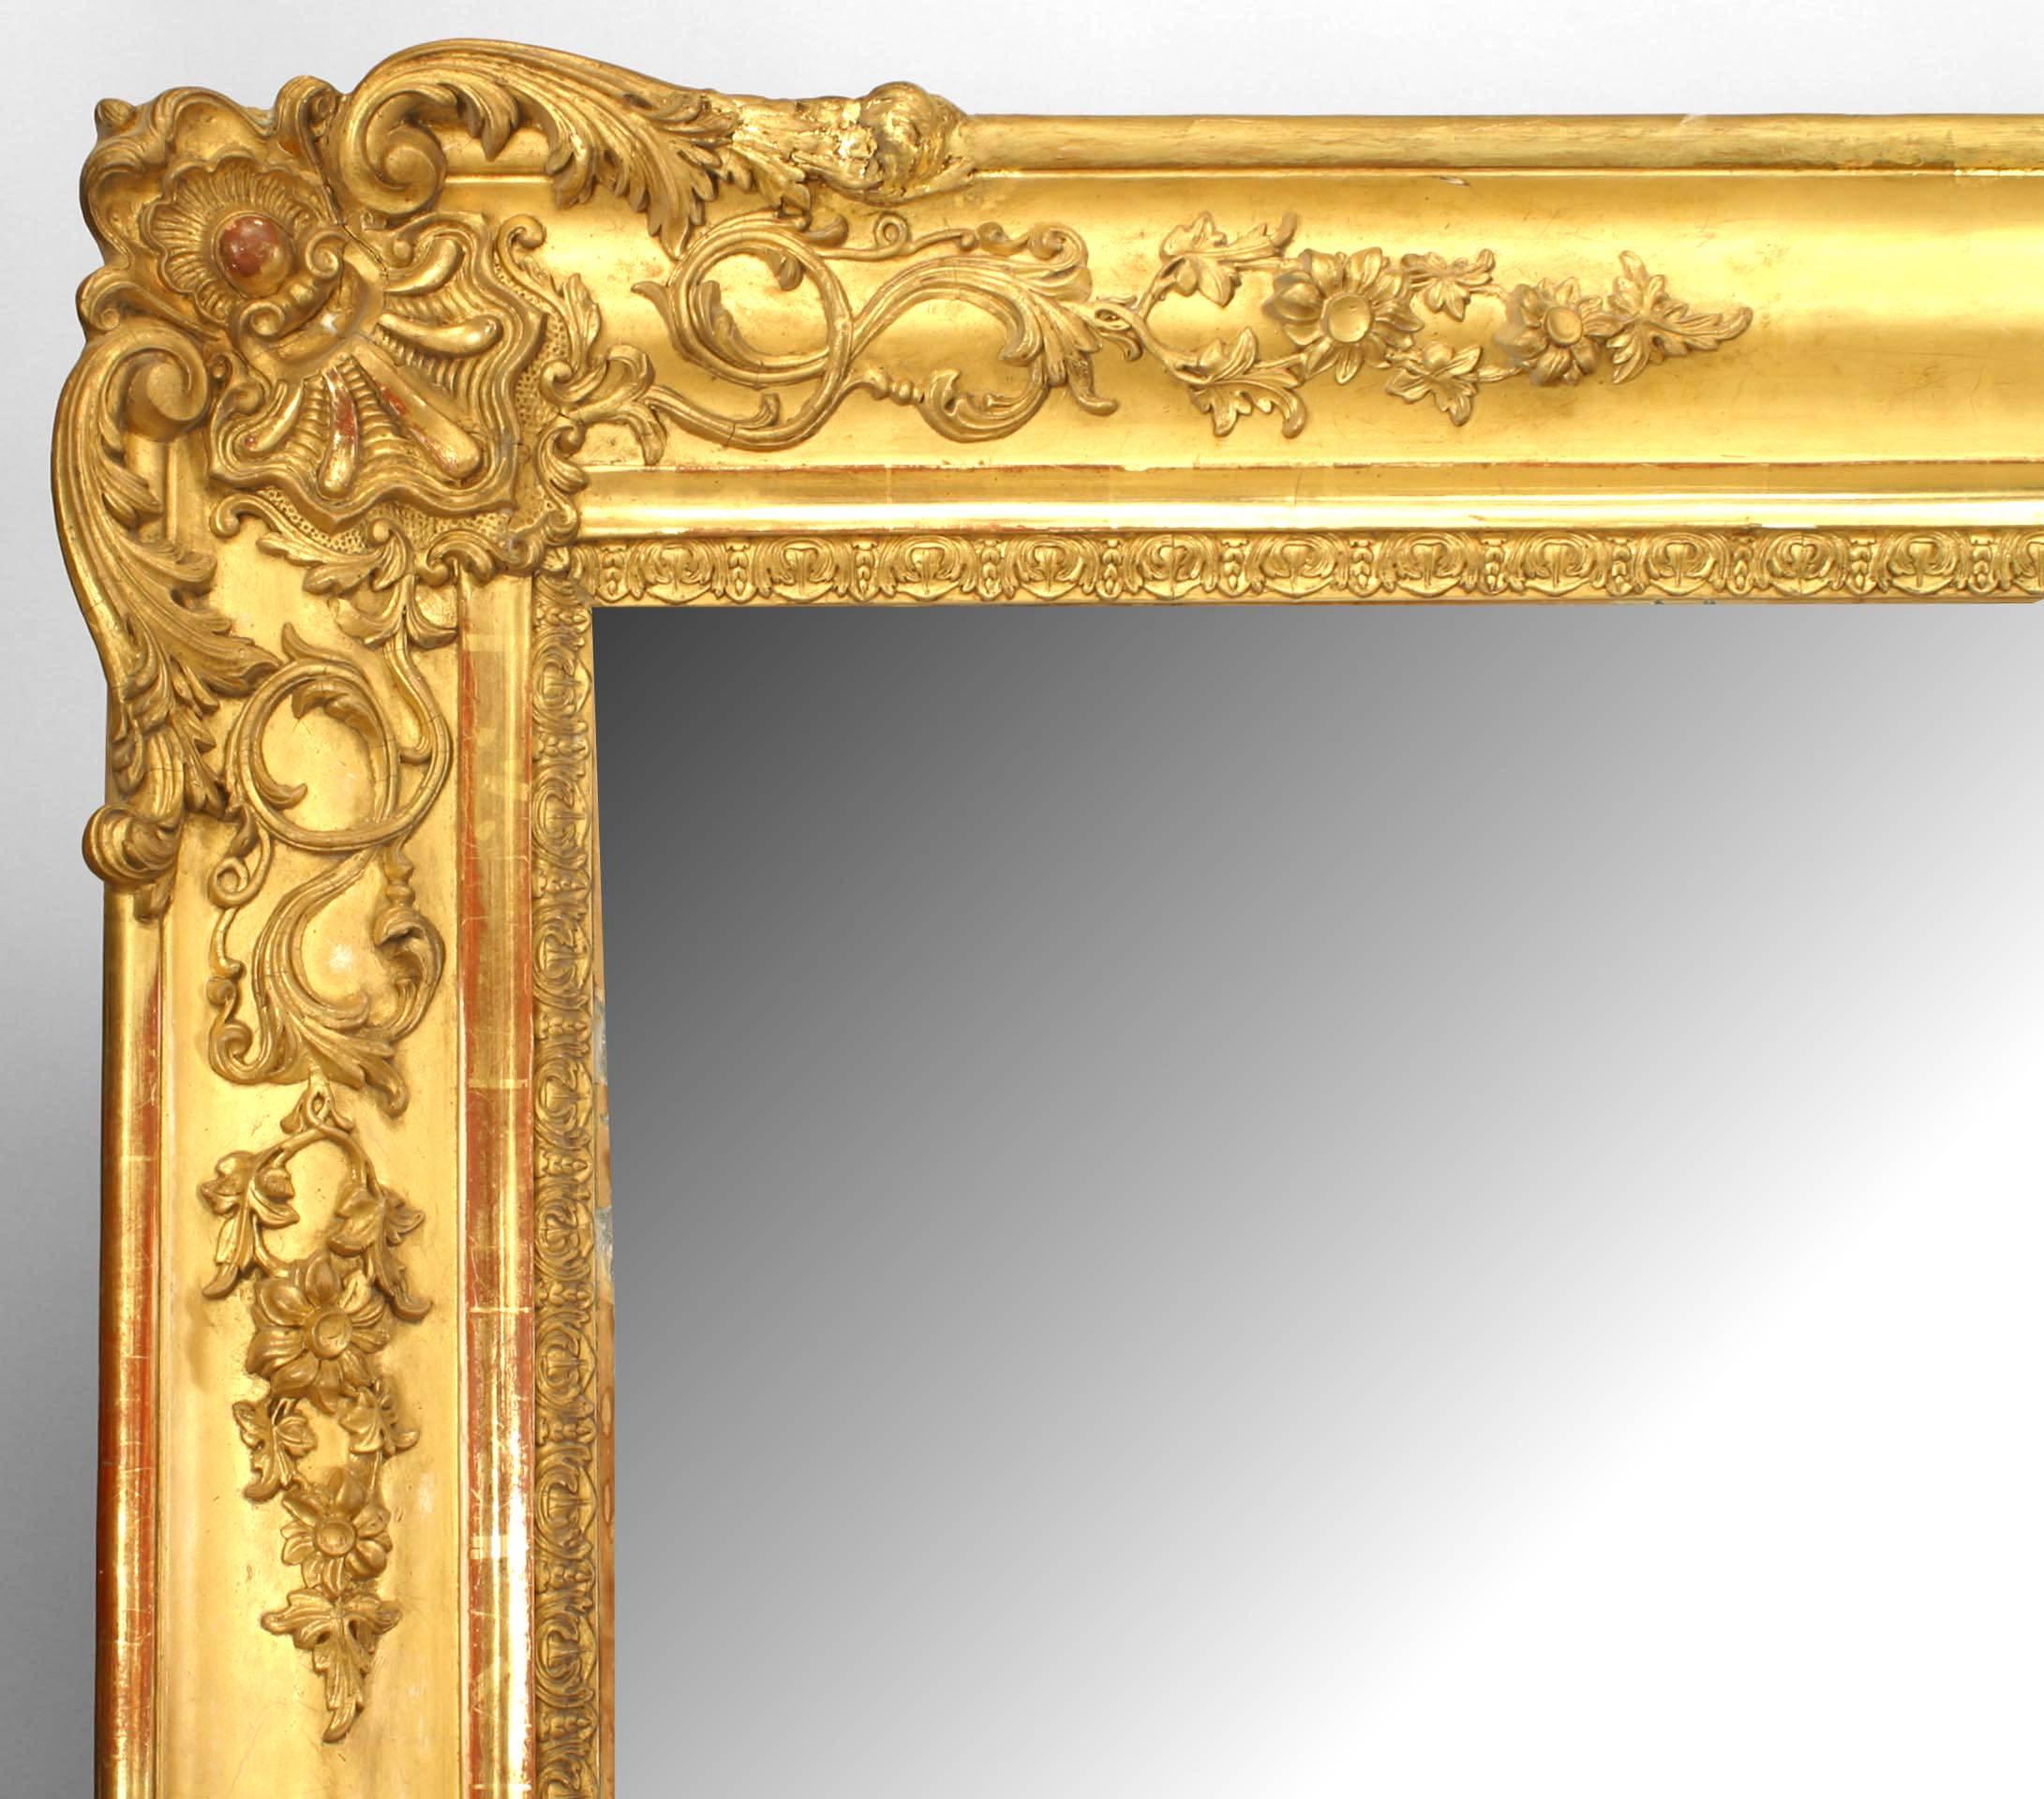 French Louis XV-style (19th Century) monumental carved giltwood wall mirror with scroll carvings in the corners and center of the sides.
